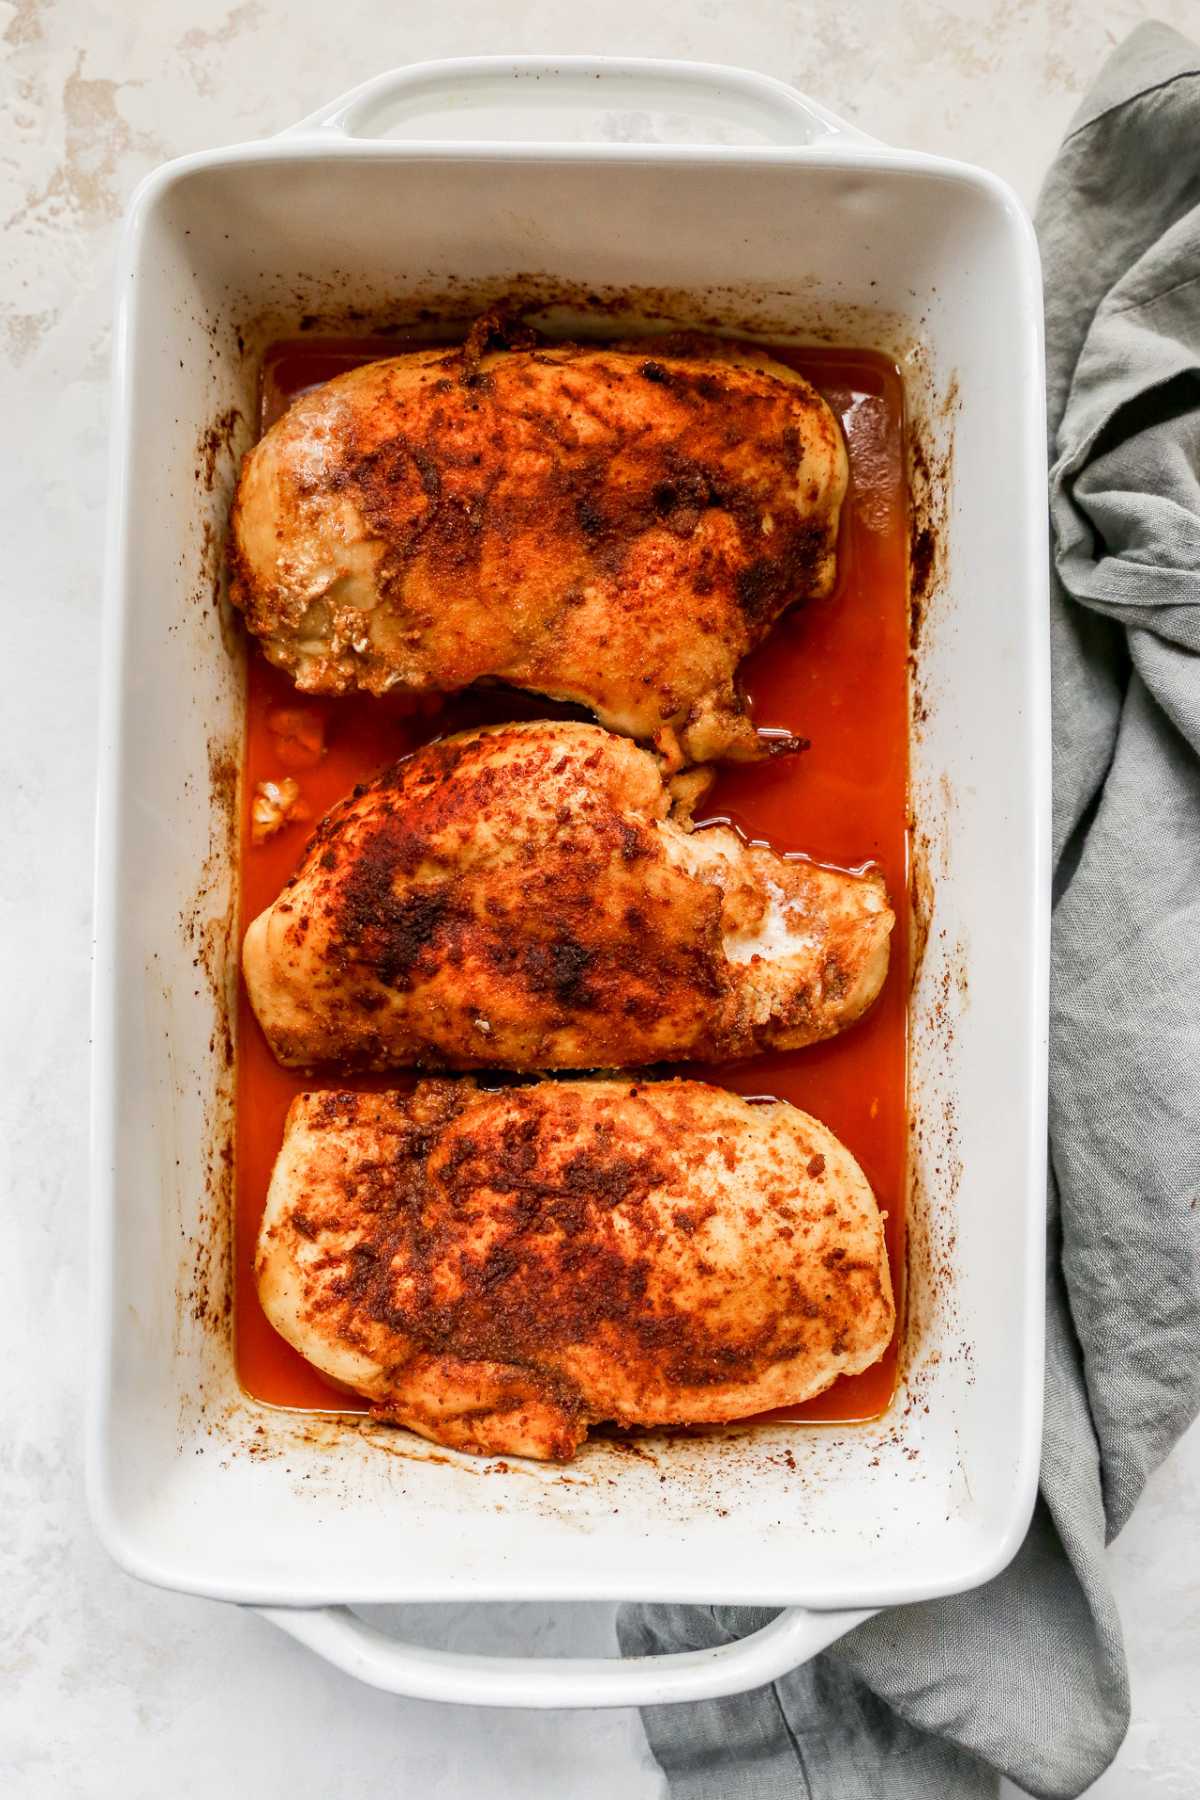 Three chicken breasts baked in a white casserole dish.